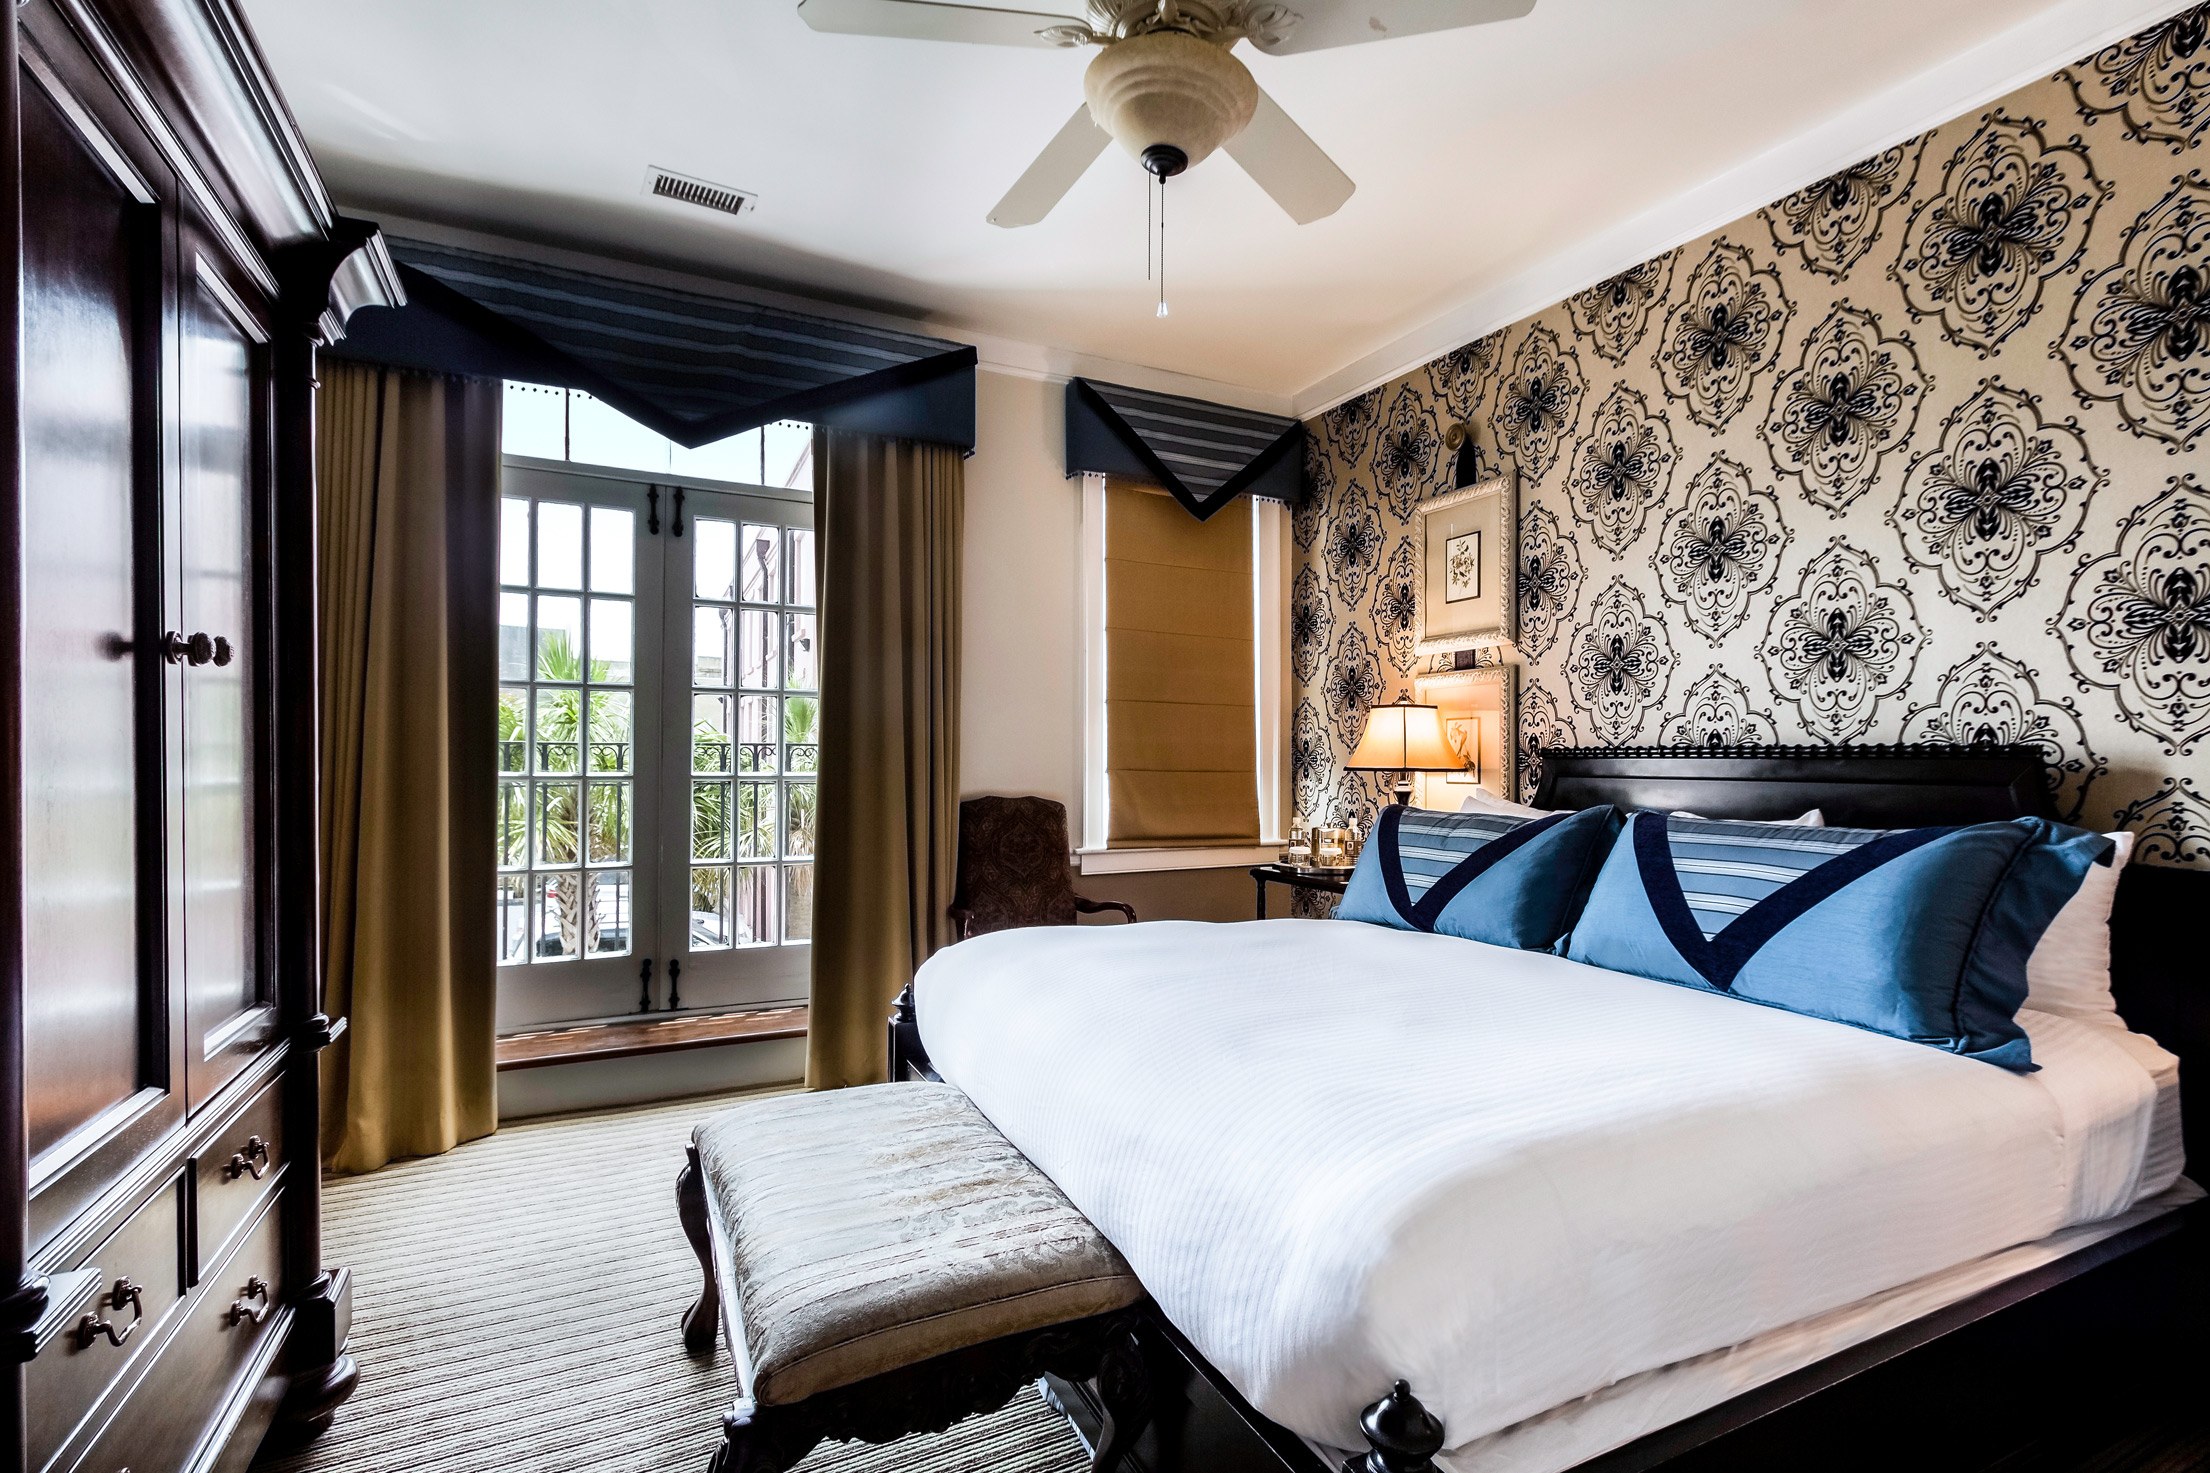 Signature King Hotel Room in Charleston, SC at The Vendue